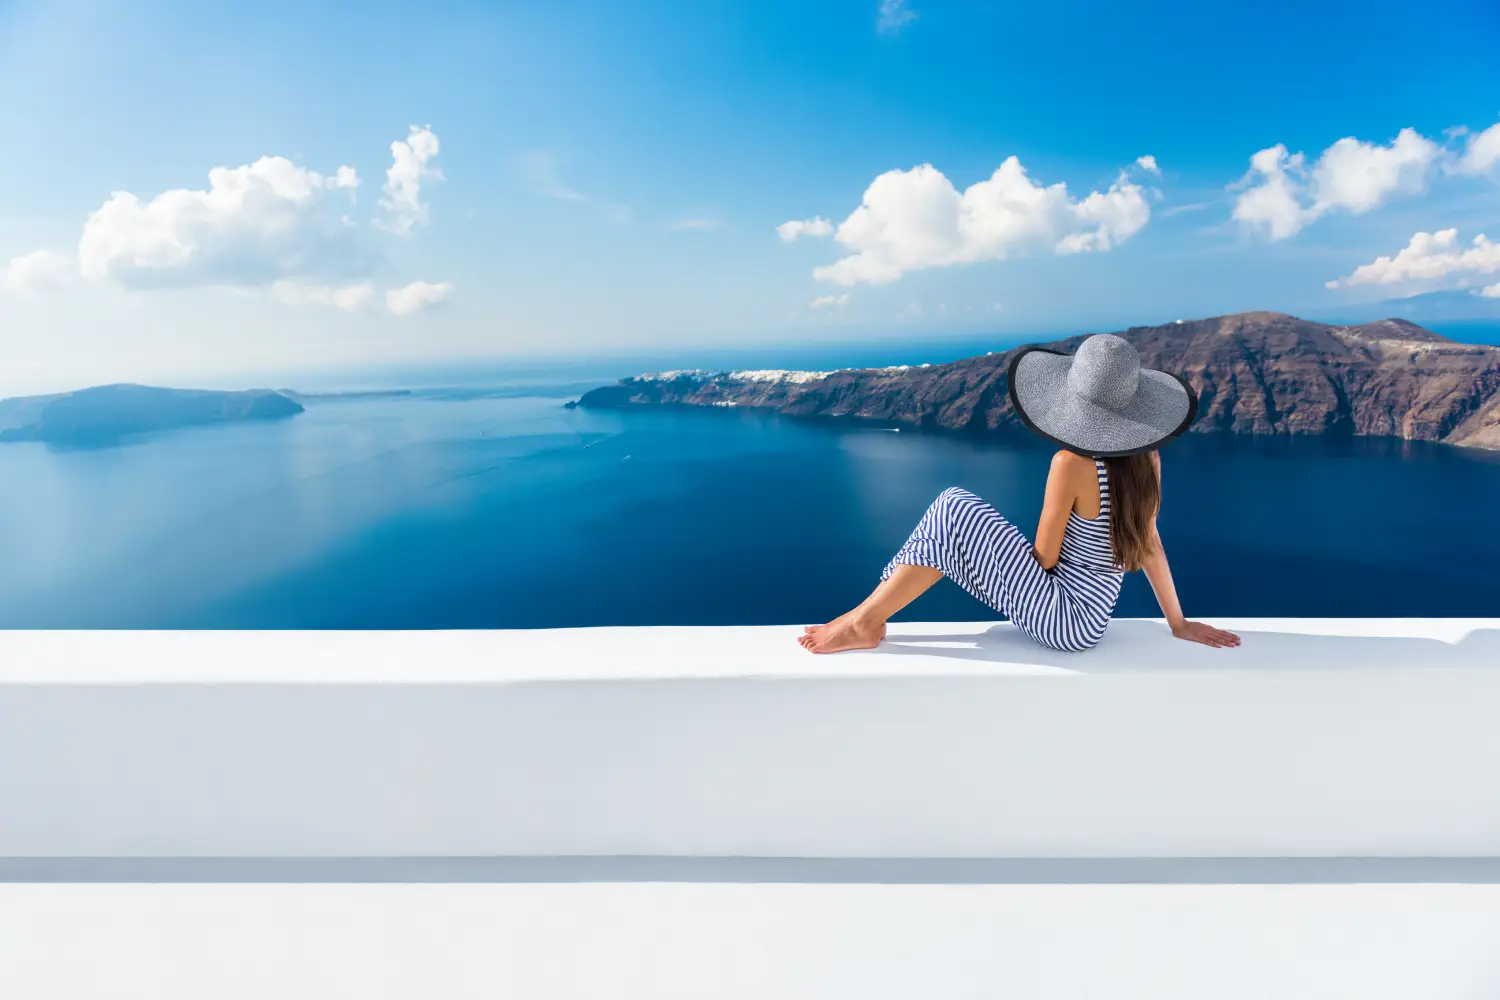 Ferry to Santorini - Europe Greece Santorini travel vacation. Woman looking at view on famous travel destination.